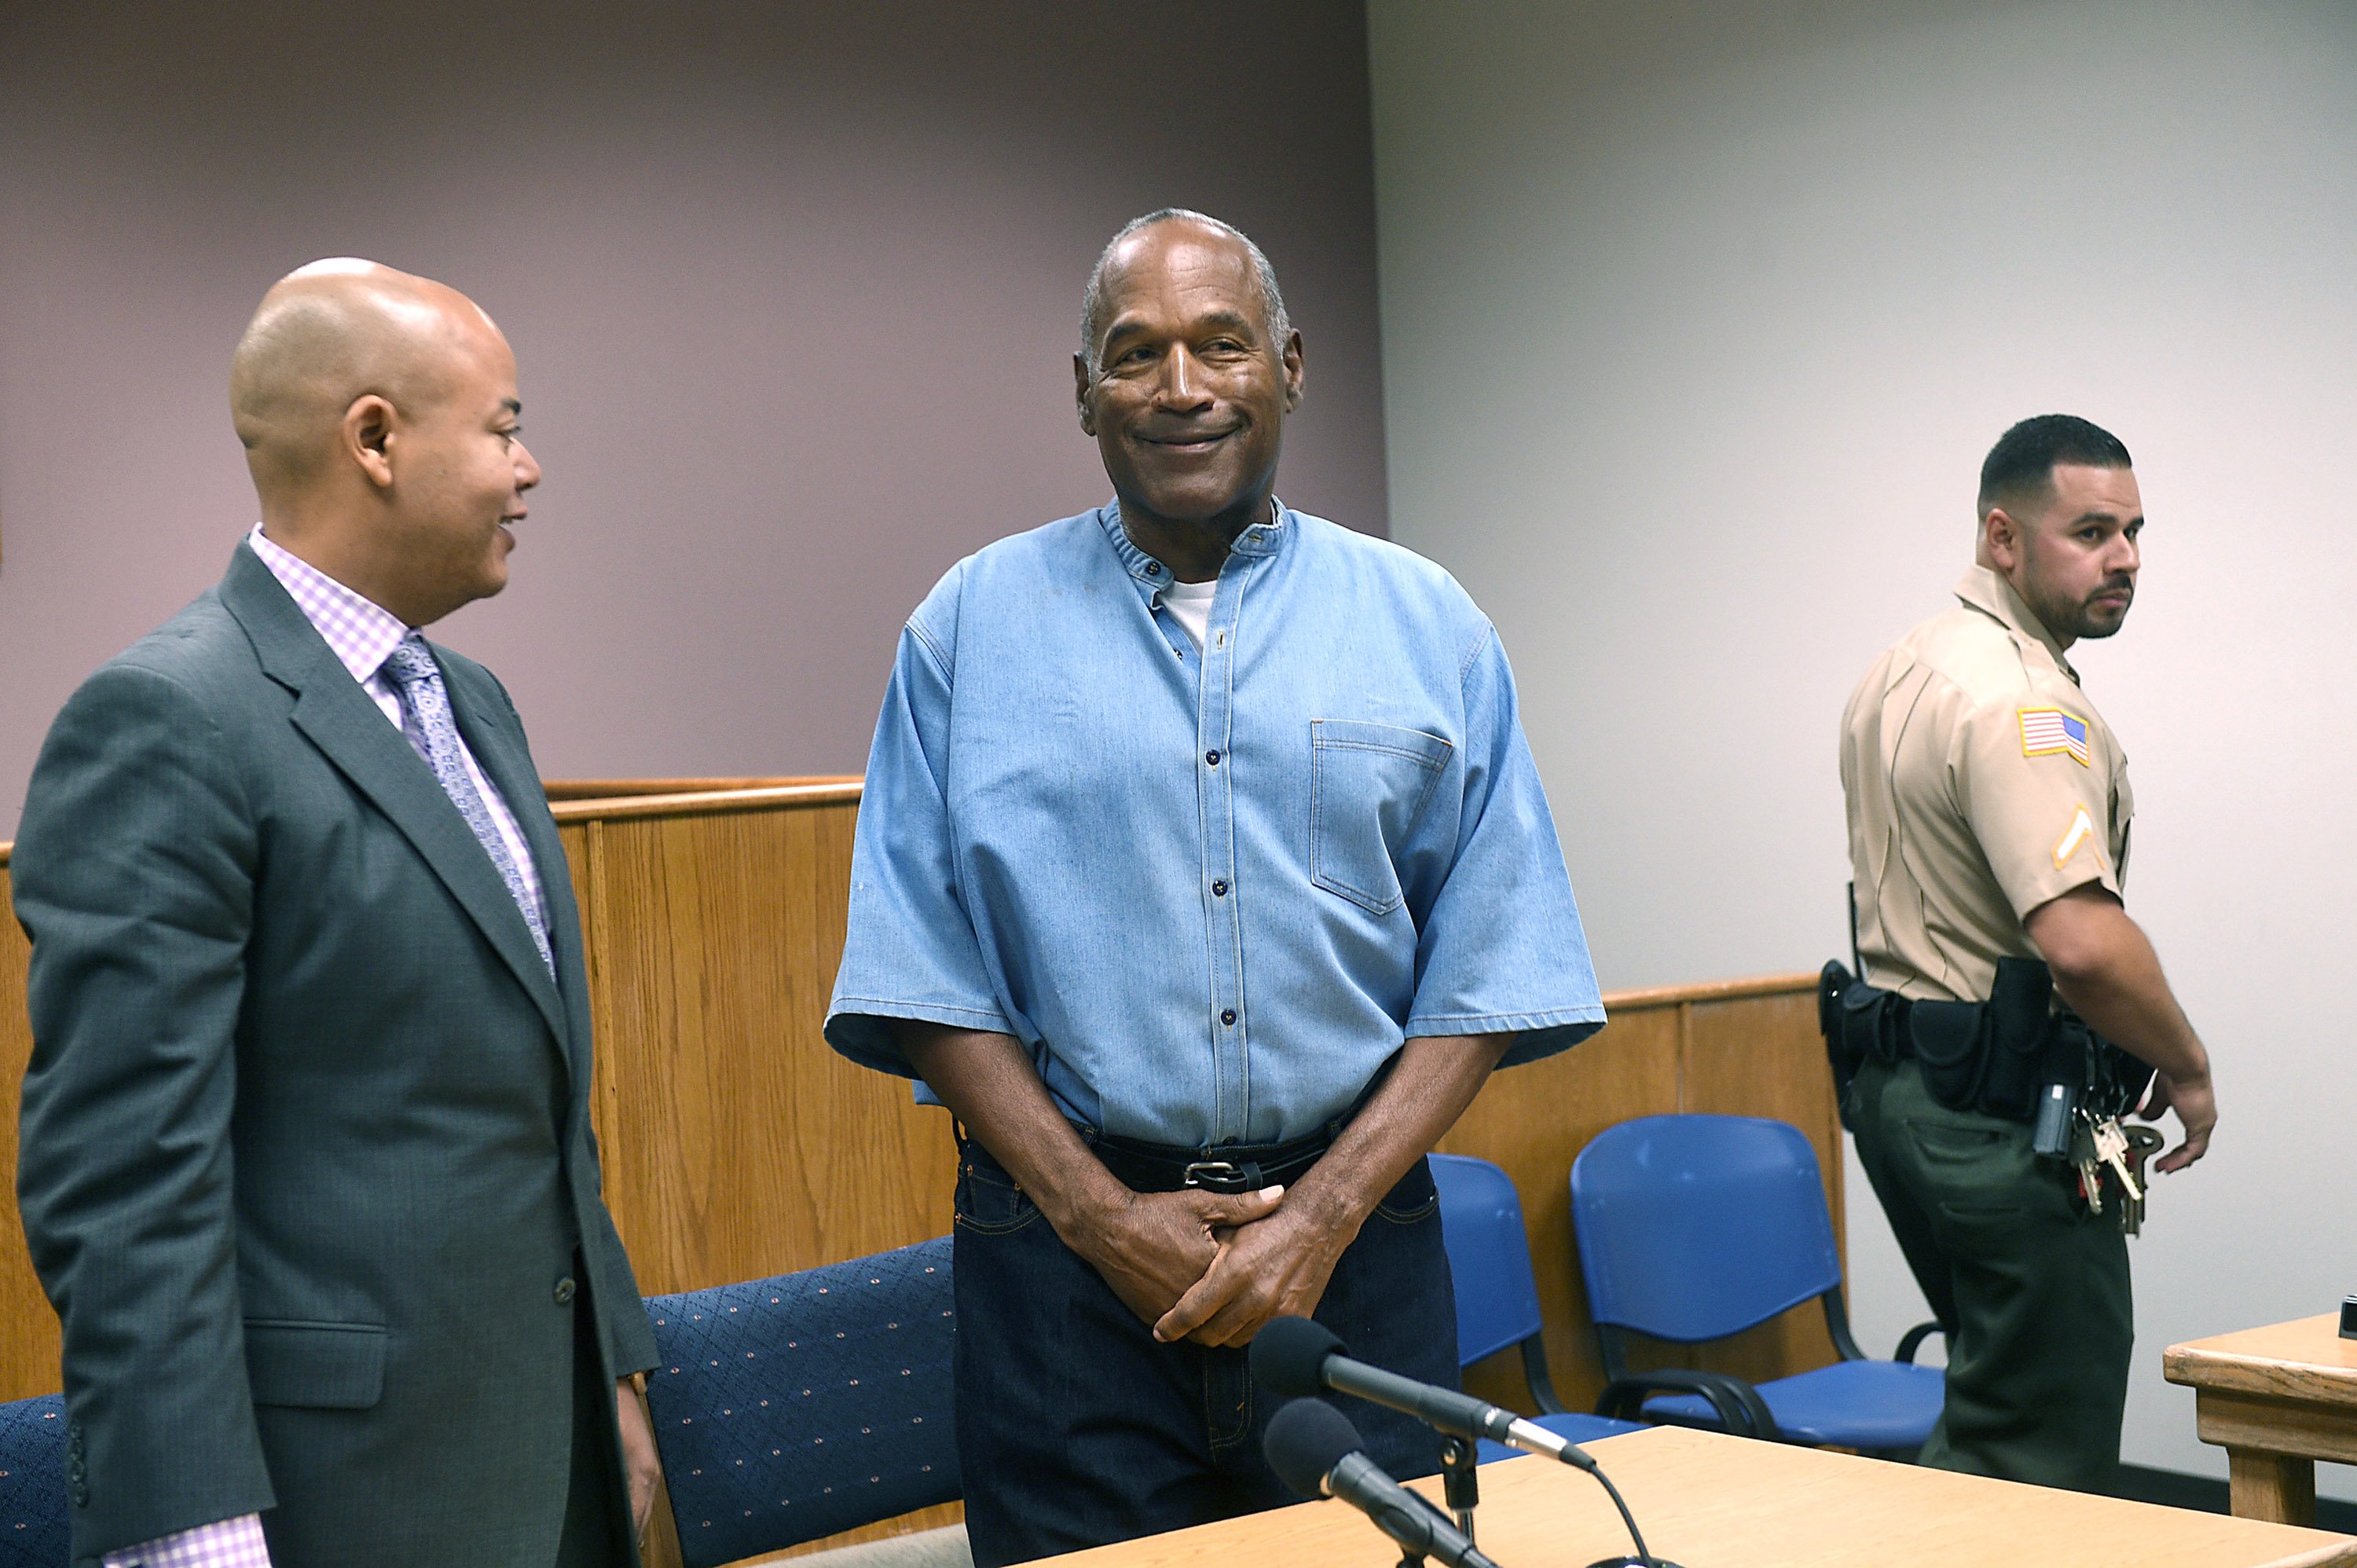 O.J. Simpson arrives for his parole hearing with his attorney Malcolm LaVergne at Lovelock Correctional Center July 20, 2017 in Lovelock, Nevada